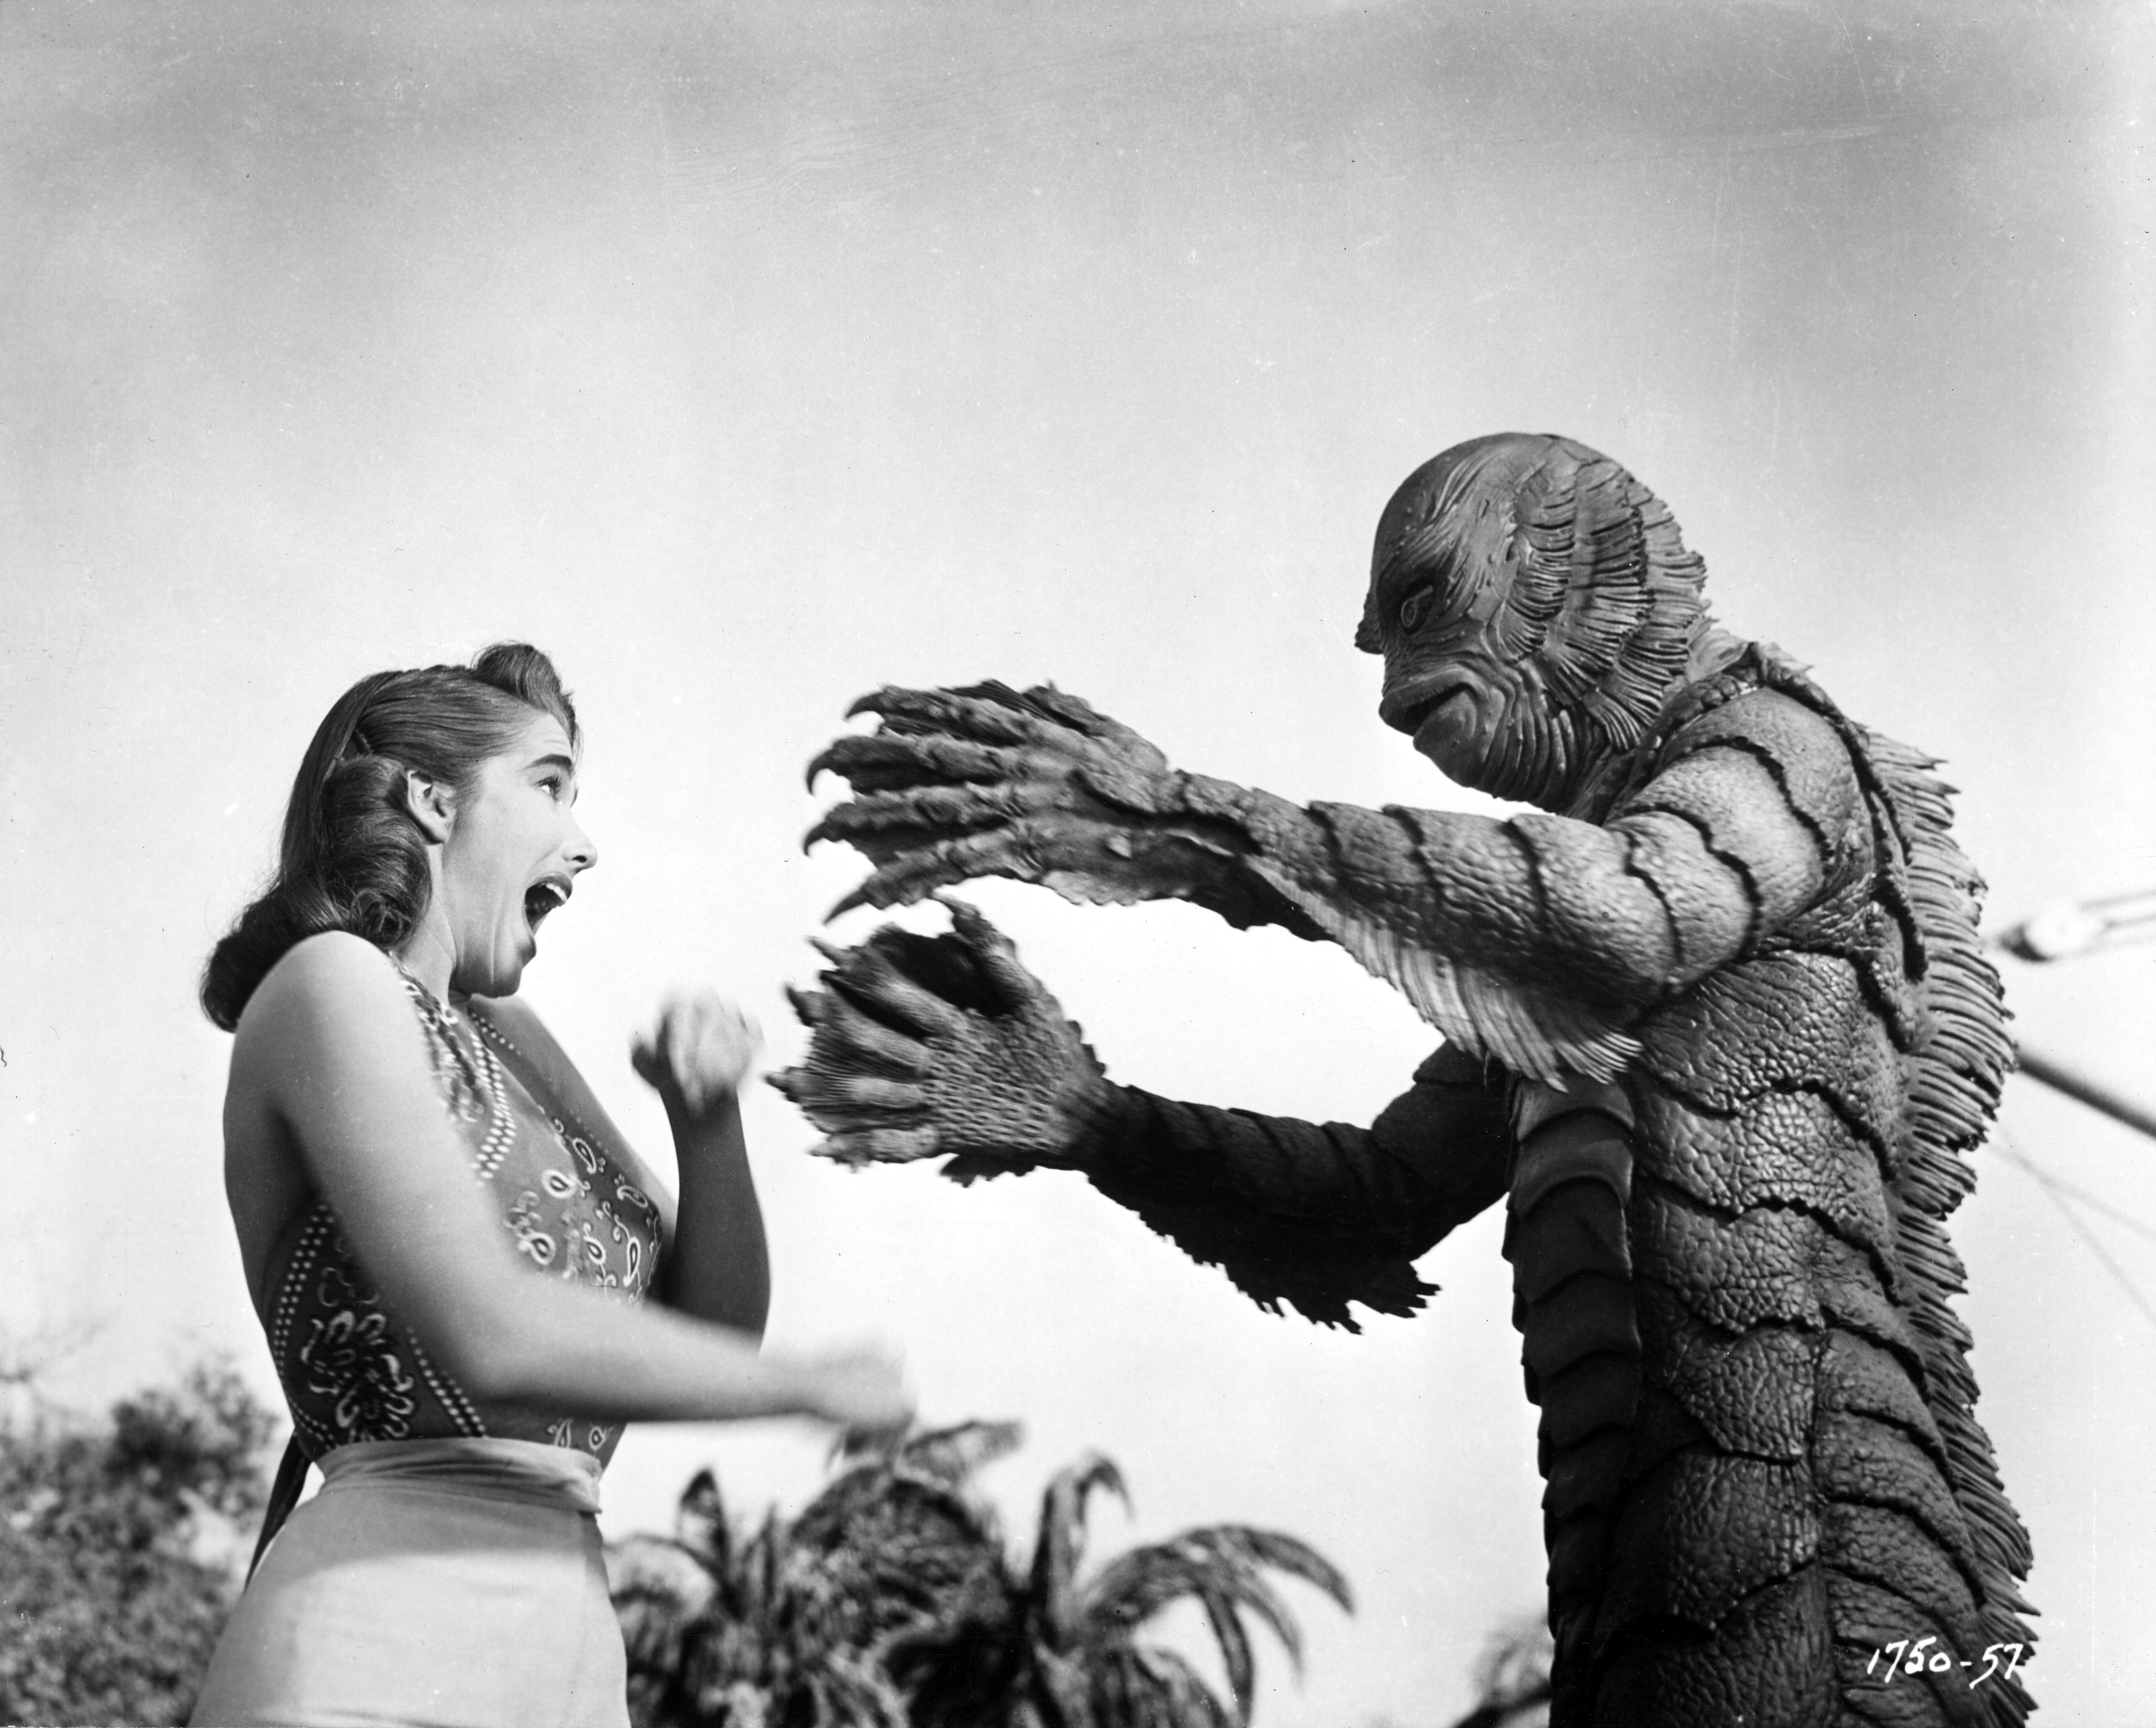 Pictured: Julie Adams and the Gill Man in CREATURE FROM THE BLACK LAGOON, 1954.